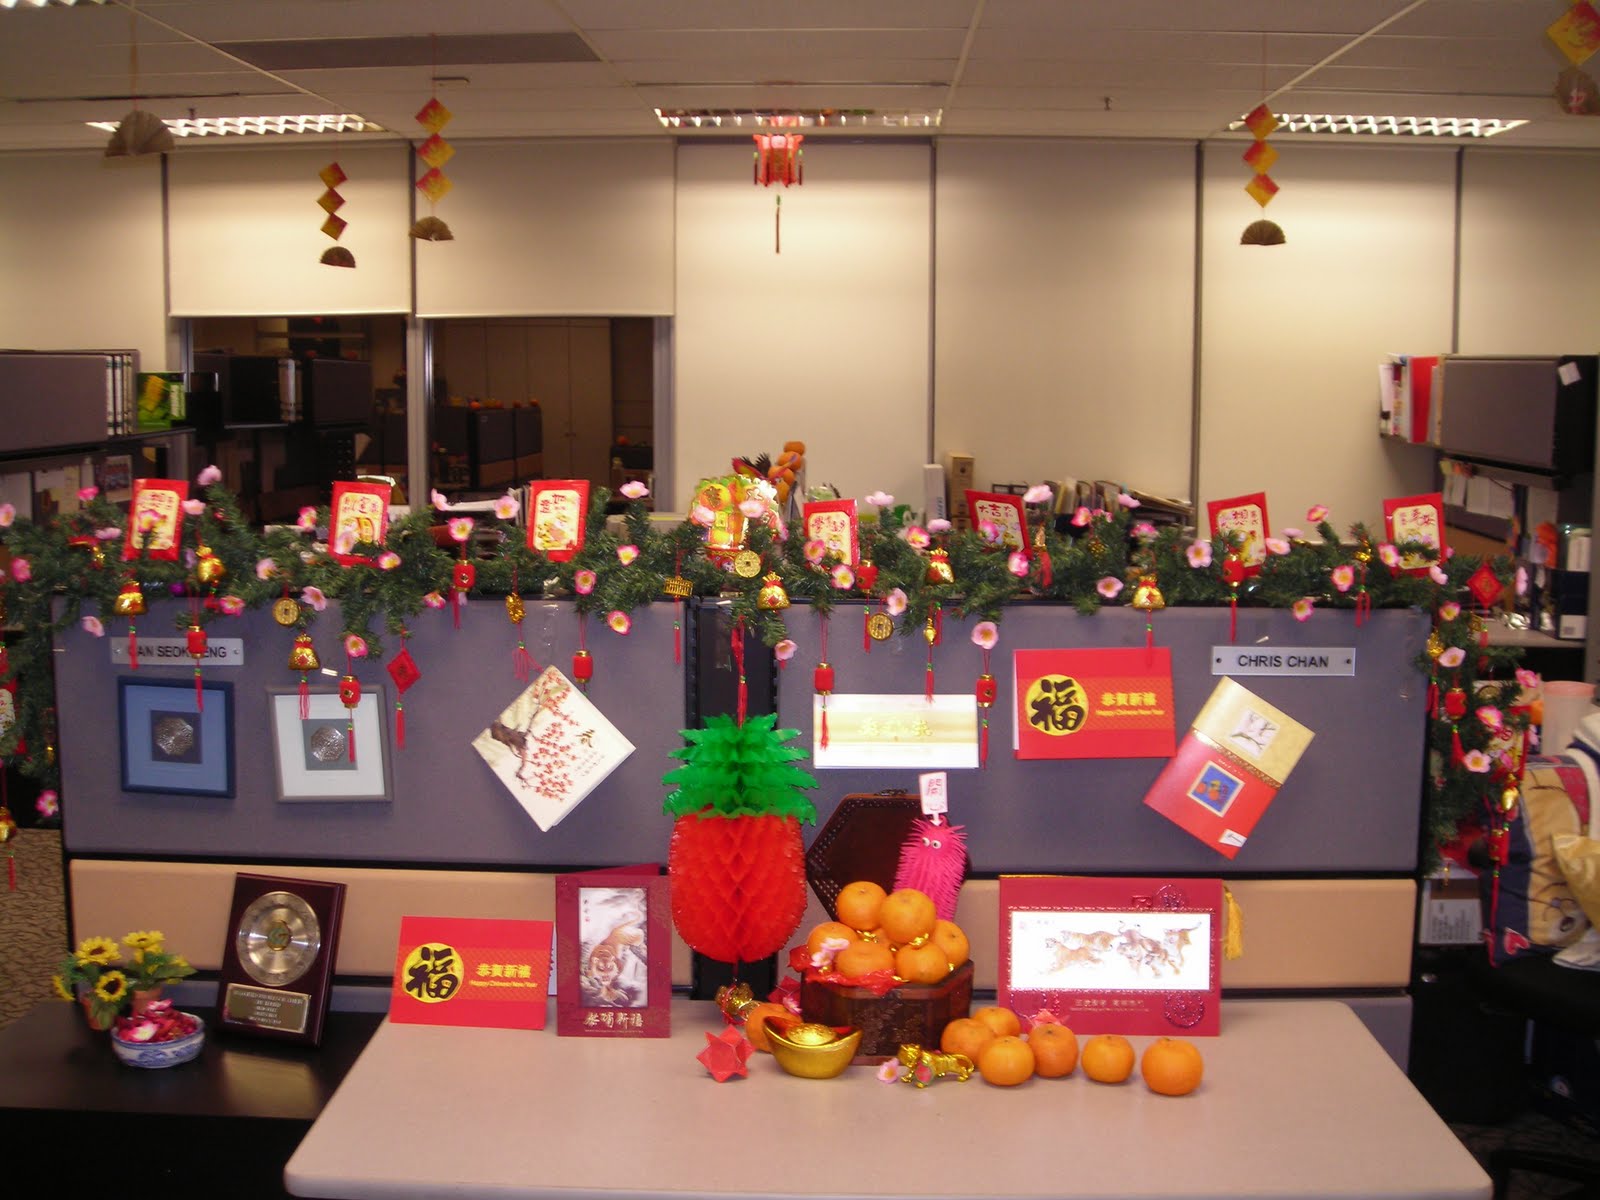 chinese-office-room-decorated-with-red-felicitation-and-lantern-miniature-combine-with-pineapple-decoration-plus-oranges.